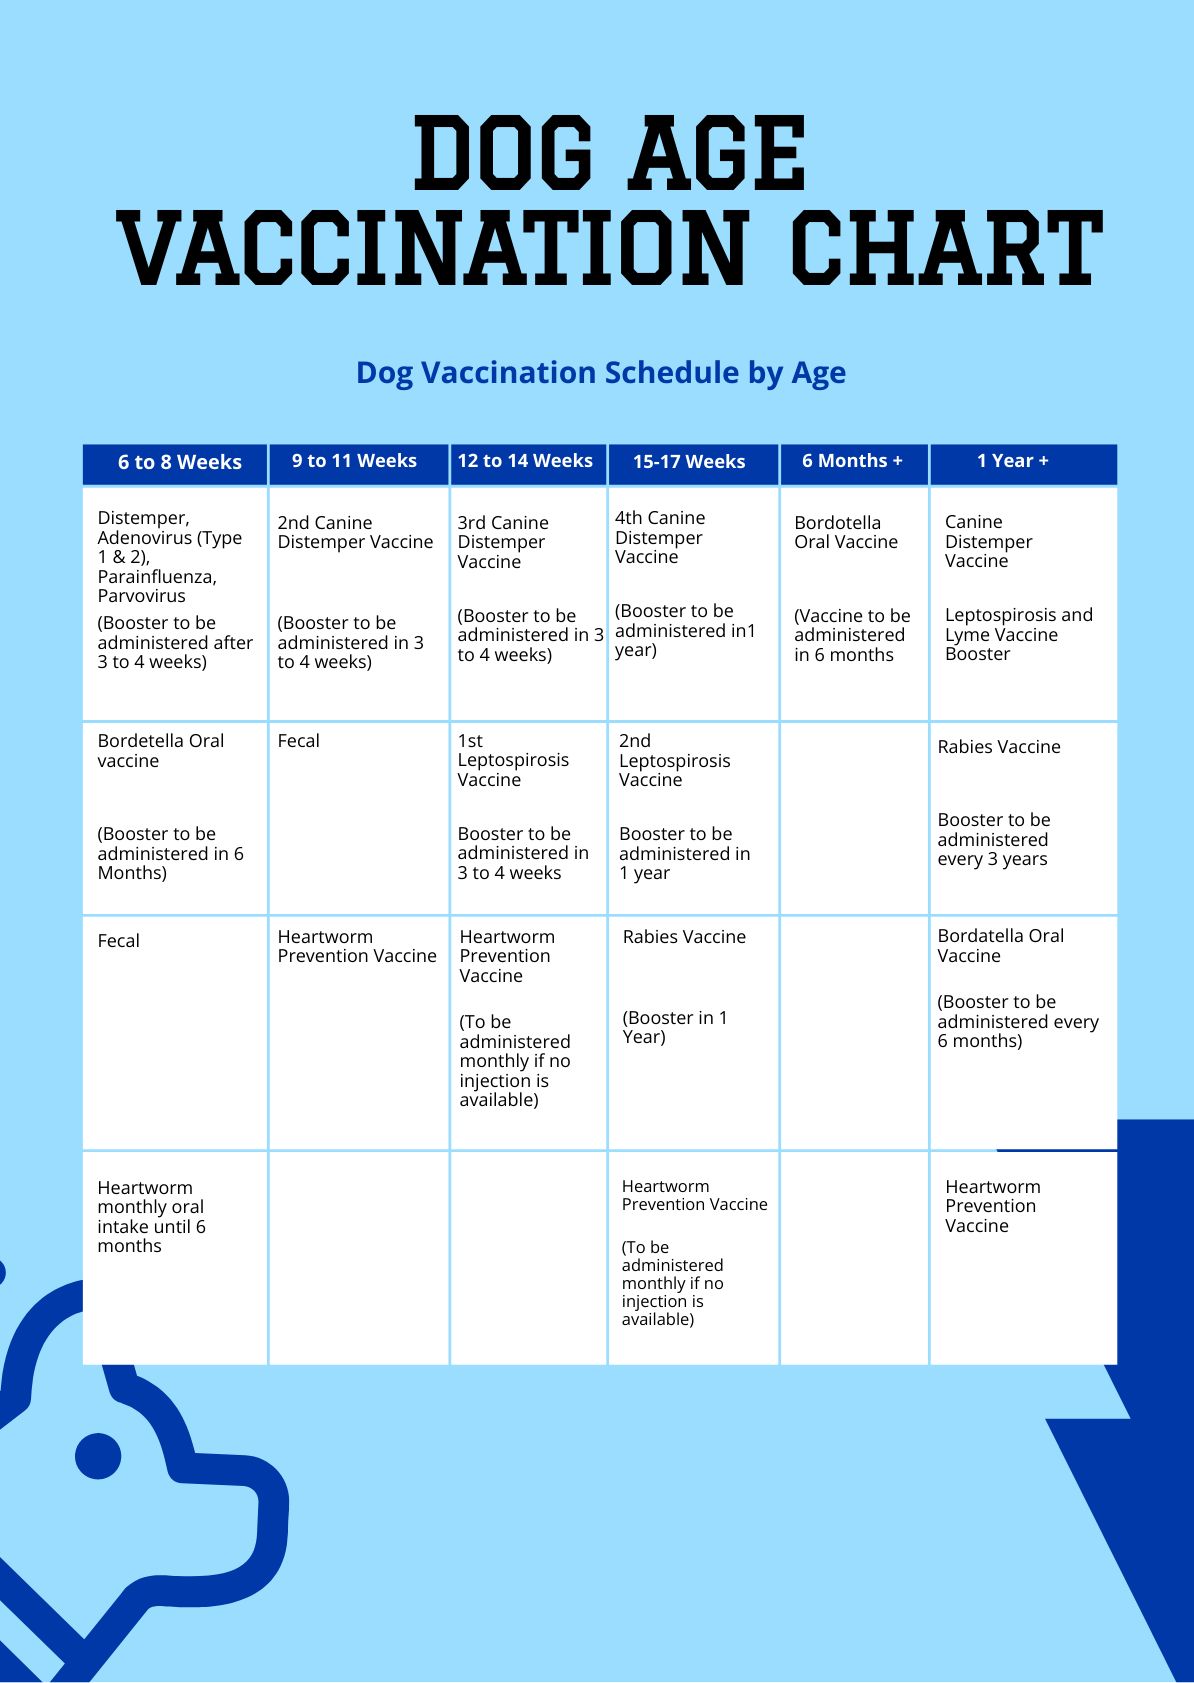 Dog Age Vaccination Chart in PDF